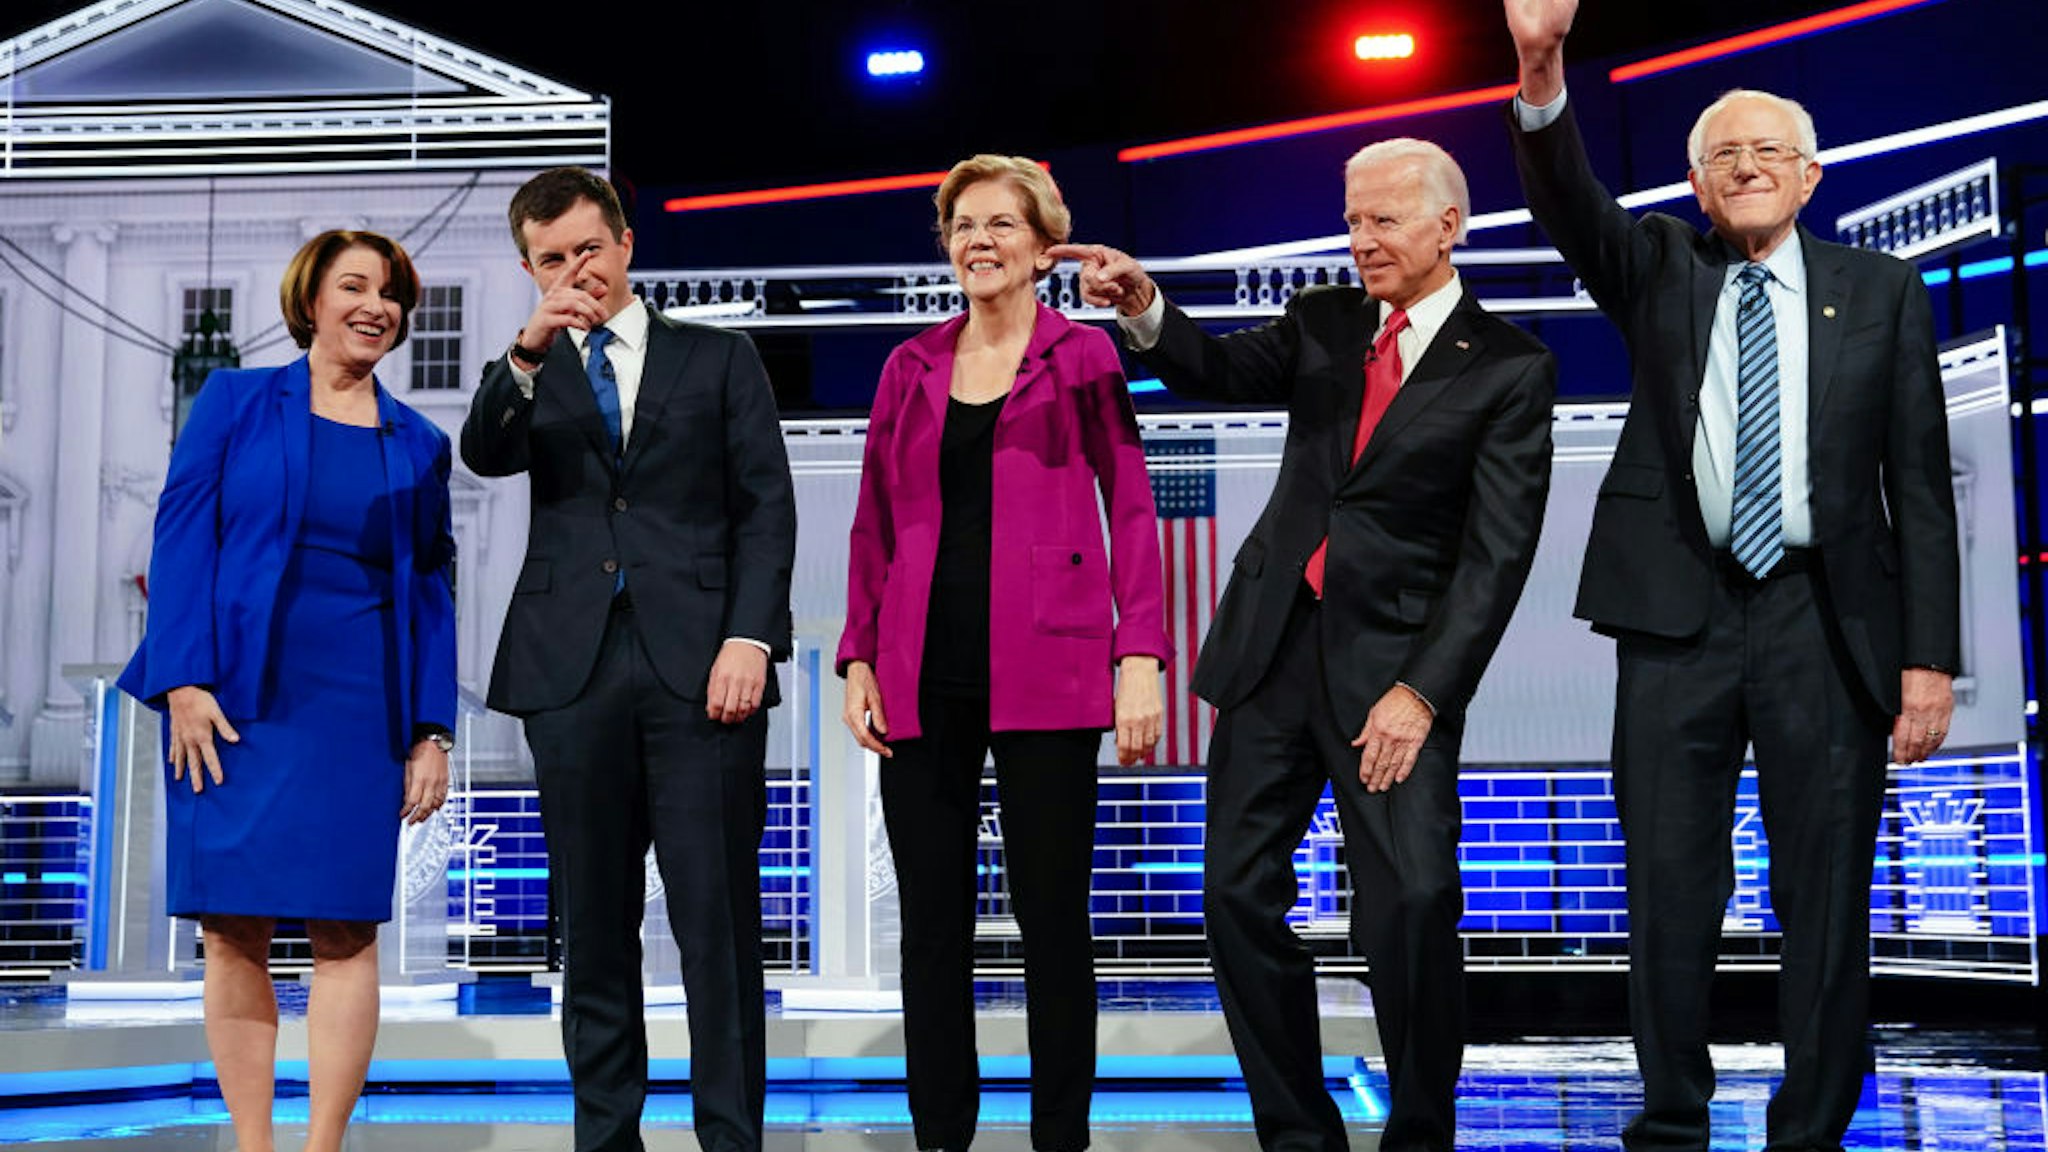 2020 presidential candidates Senator Amy Klobuchar, a Democrat from Minnesota, from left, Pete Buttigieg, mayor of South Bend, Senator Elizabeth Warren, a Democrat from Massachusetts, Former U.S. Vice President Joe Biden, and Senator Bernie Sanders, an independent from Vermont, stand on stage for the Democratic presidential debate in Atlanta, Georgia, U.S., on Wednesday, Nov. 20, 2019. The Democratic presidential races new pecking order will be on full display Wednesday night, with Pete Buttigieg taking the debate stage as the emerging front-runner in Iowa and top 2020 rivals Joe Biden and Senator Elizabeth Warren trying to knock him off that perch.